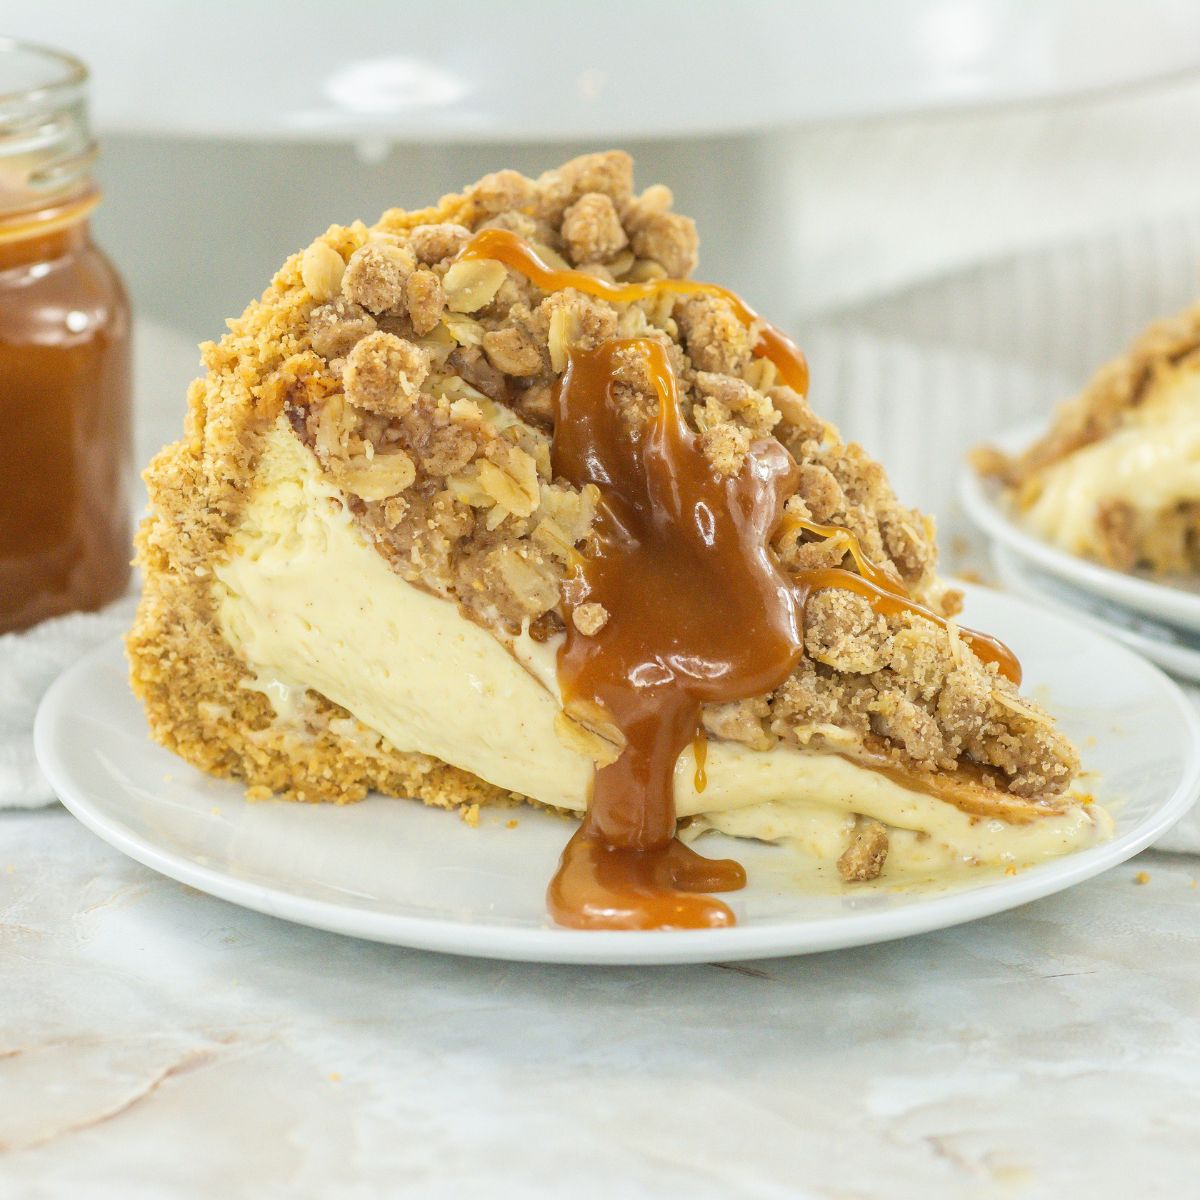 Slice of apple crunch cheesecake with caramel sauce on top.